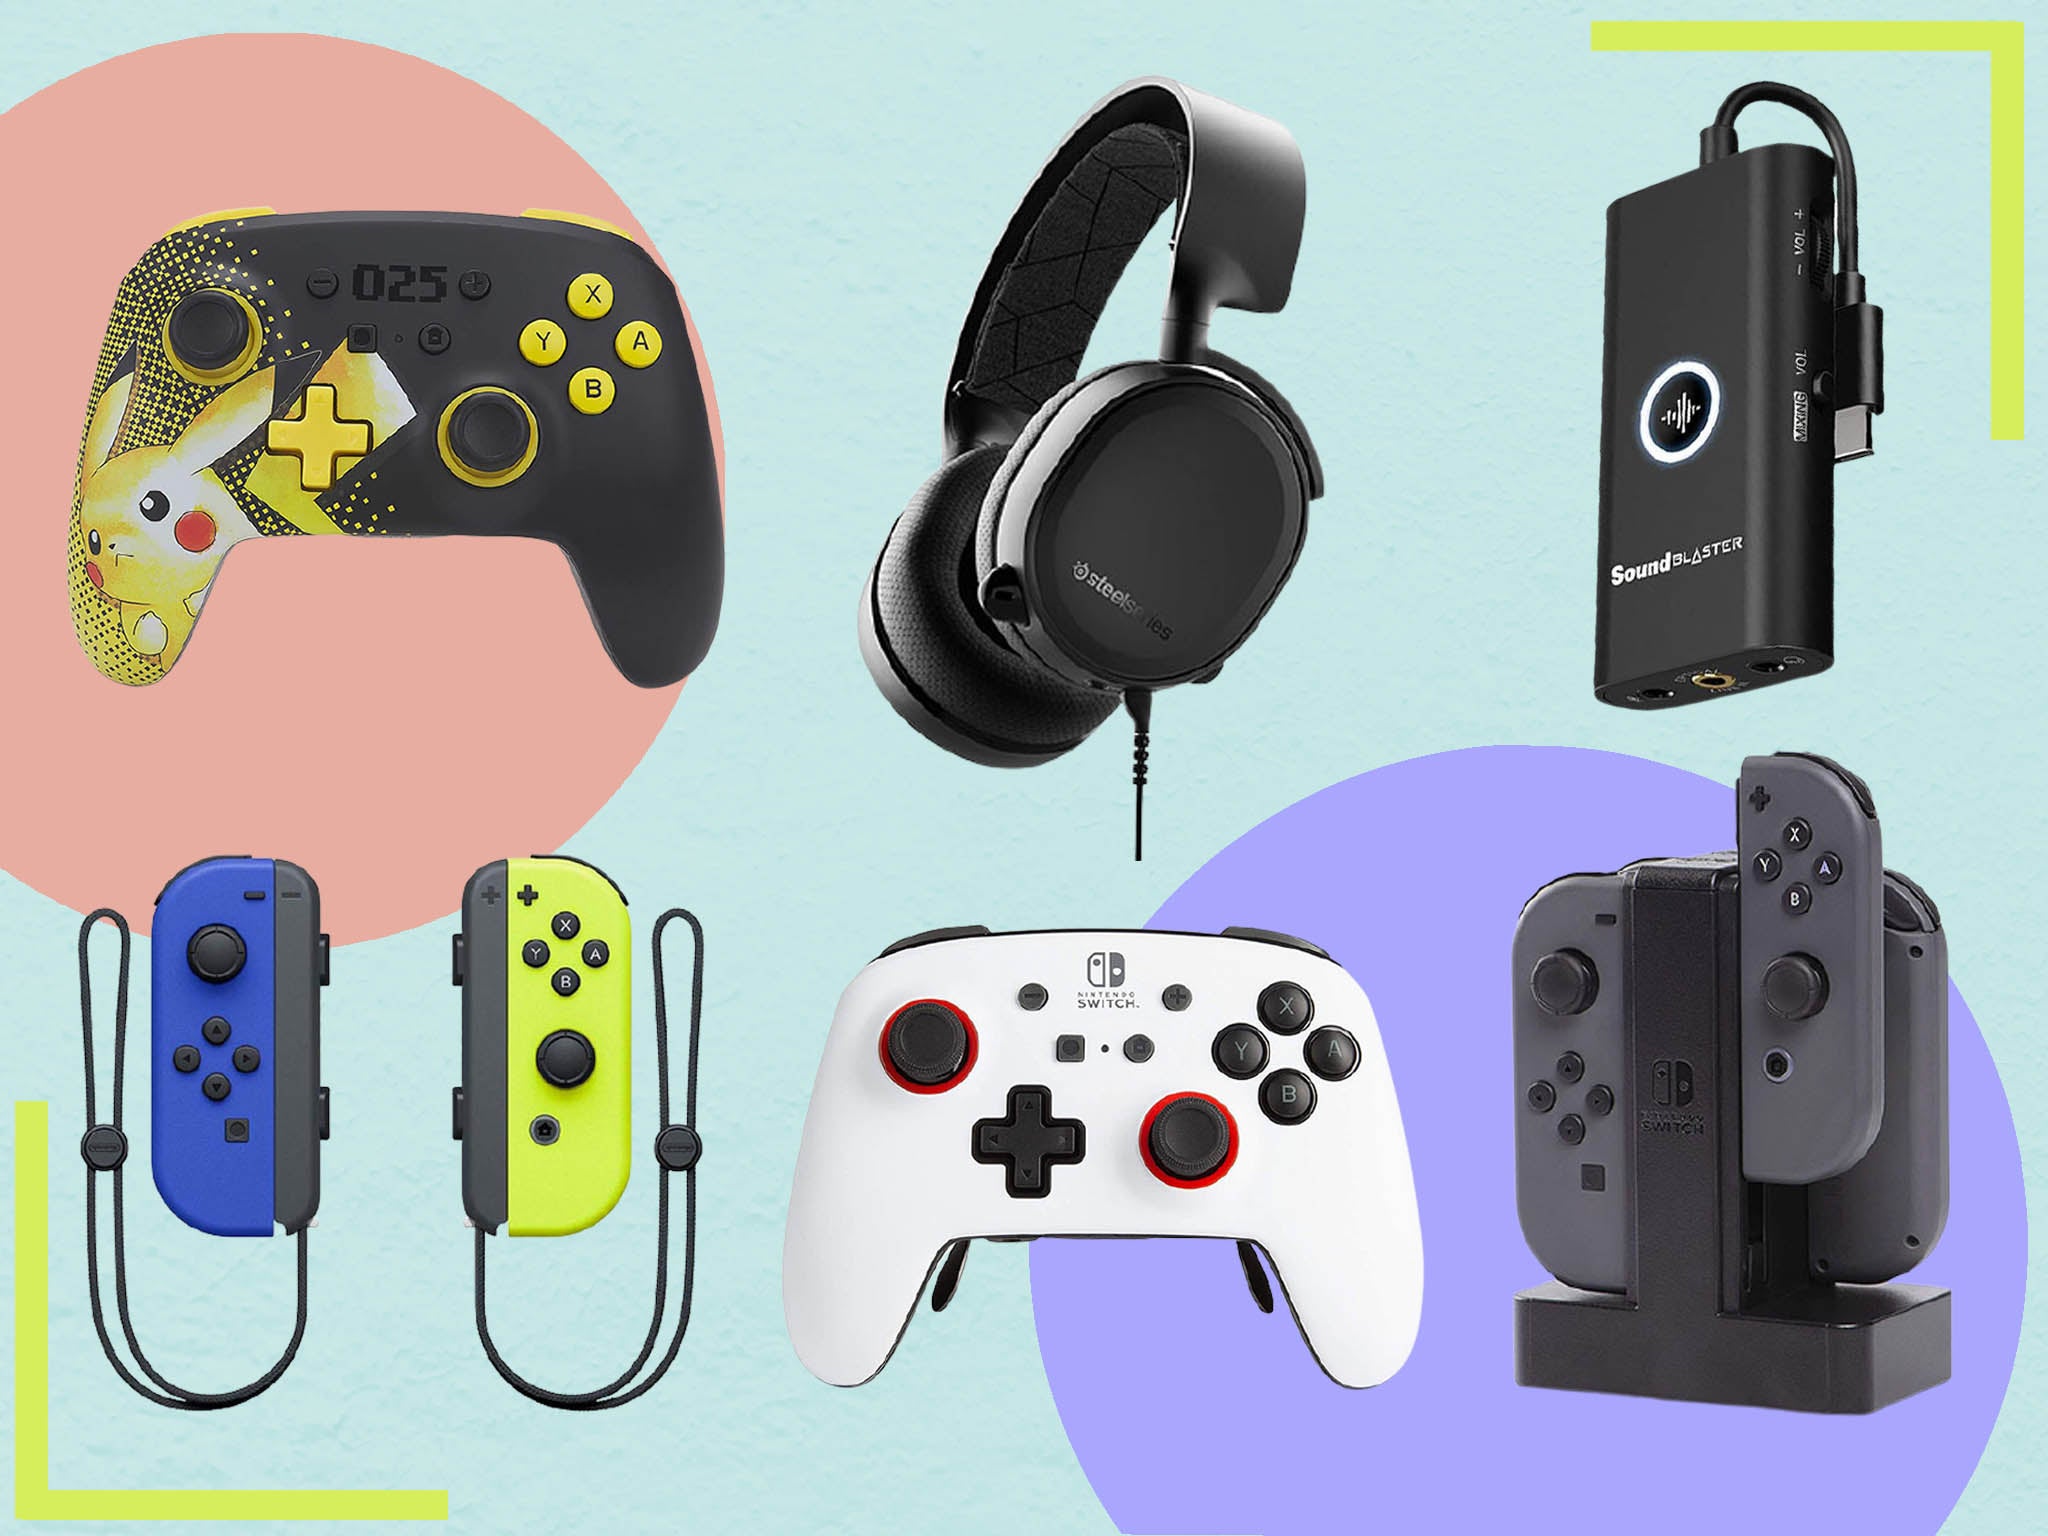 To get the most from your console, it can be useful to equip yourself with some extra accessories that can enhance your experience